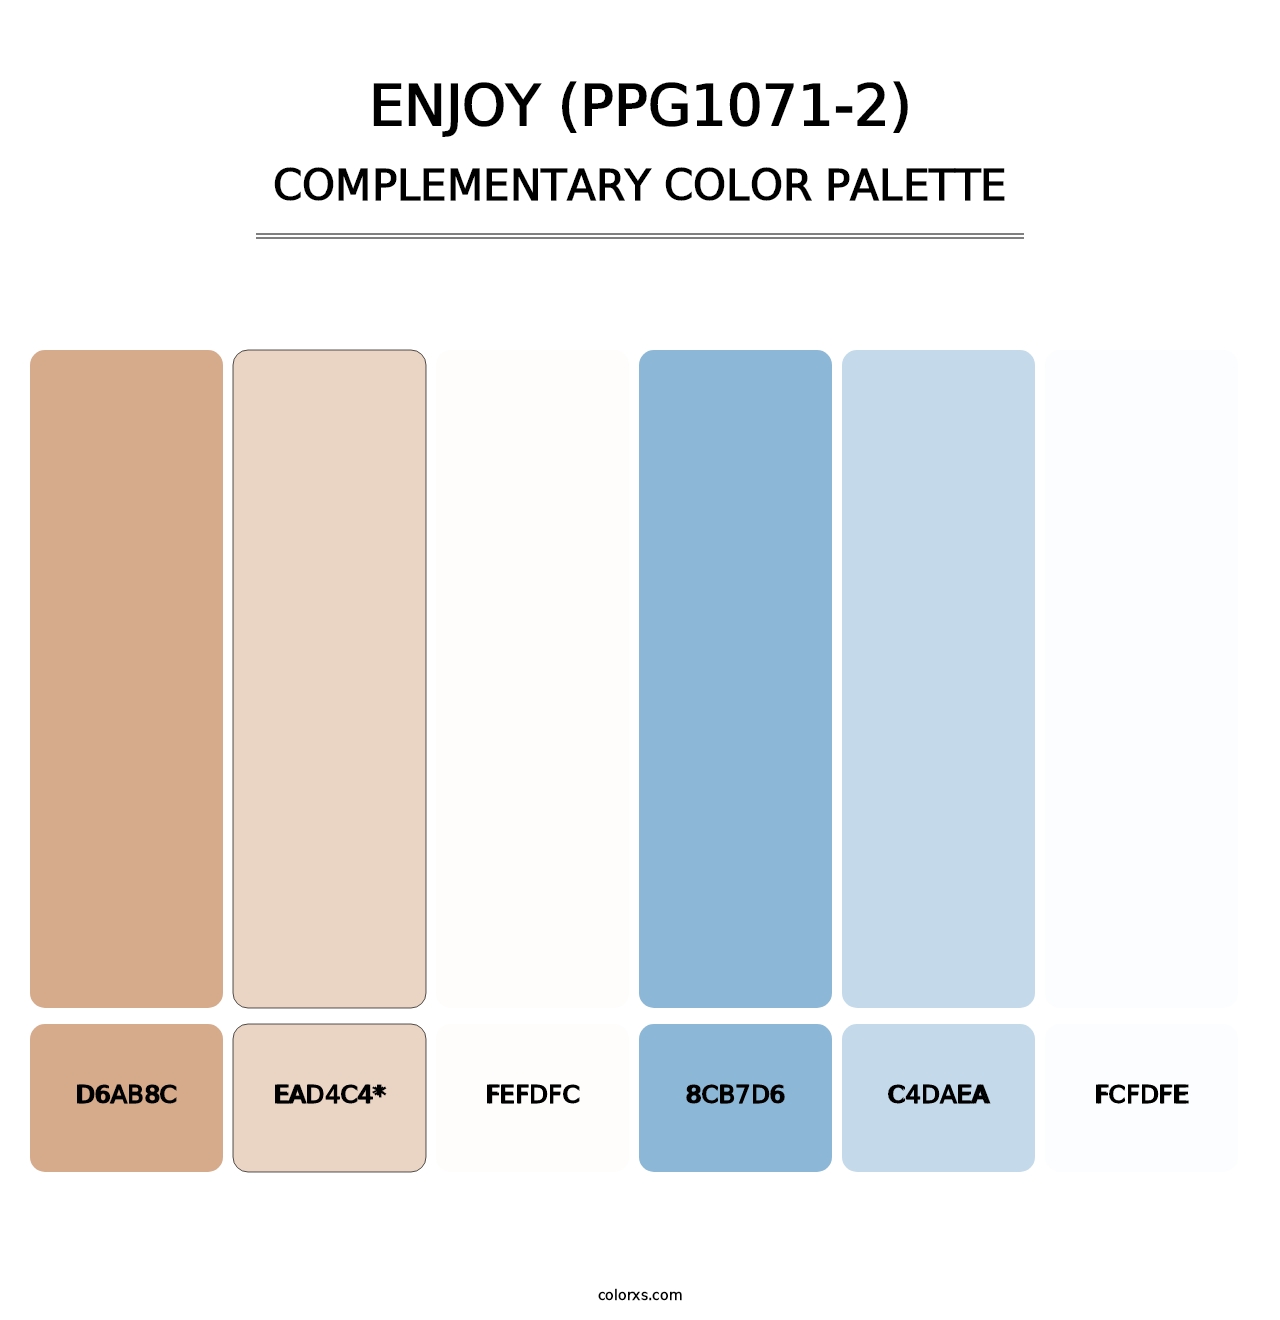 Enjoy (PPG1071-2) - Complementary Color Palette